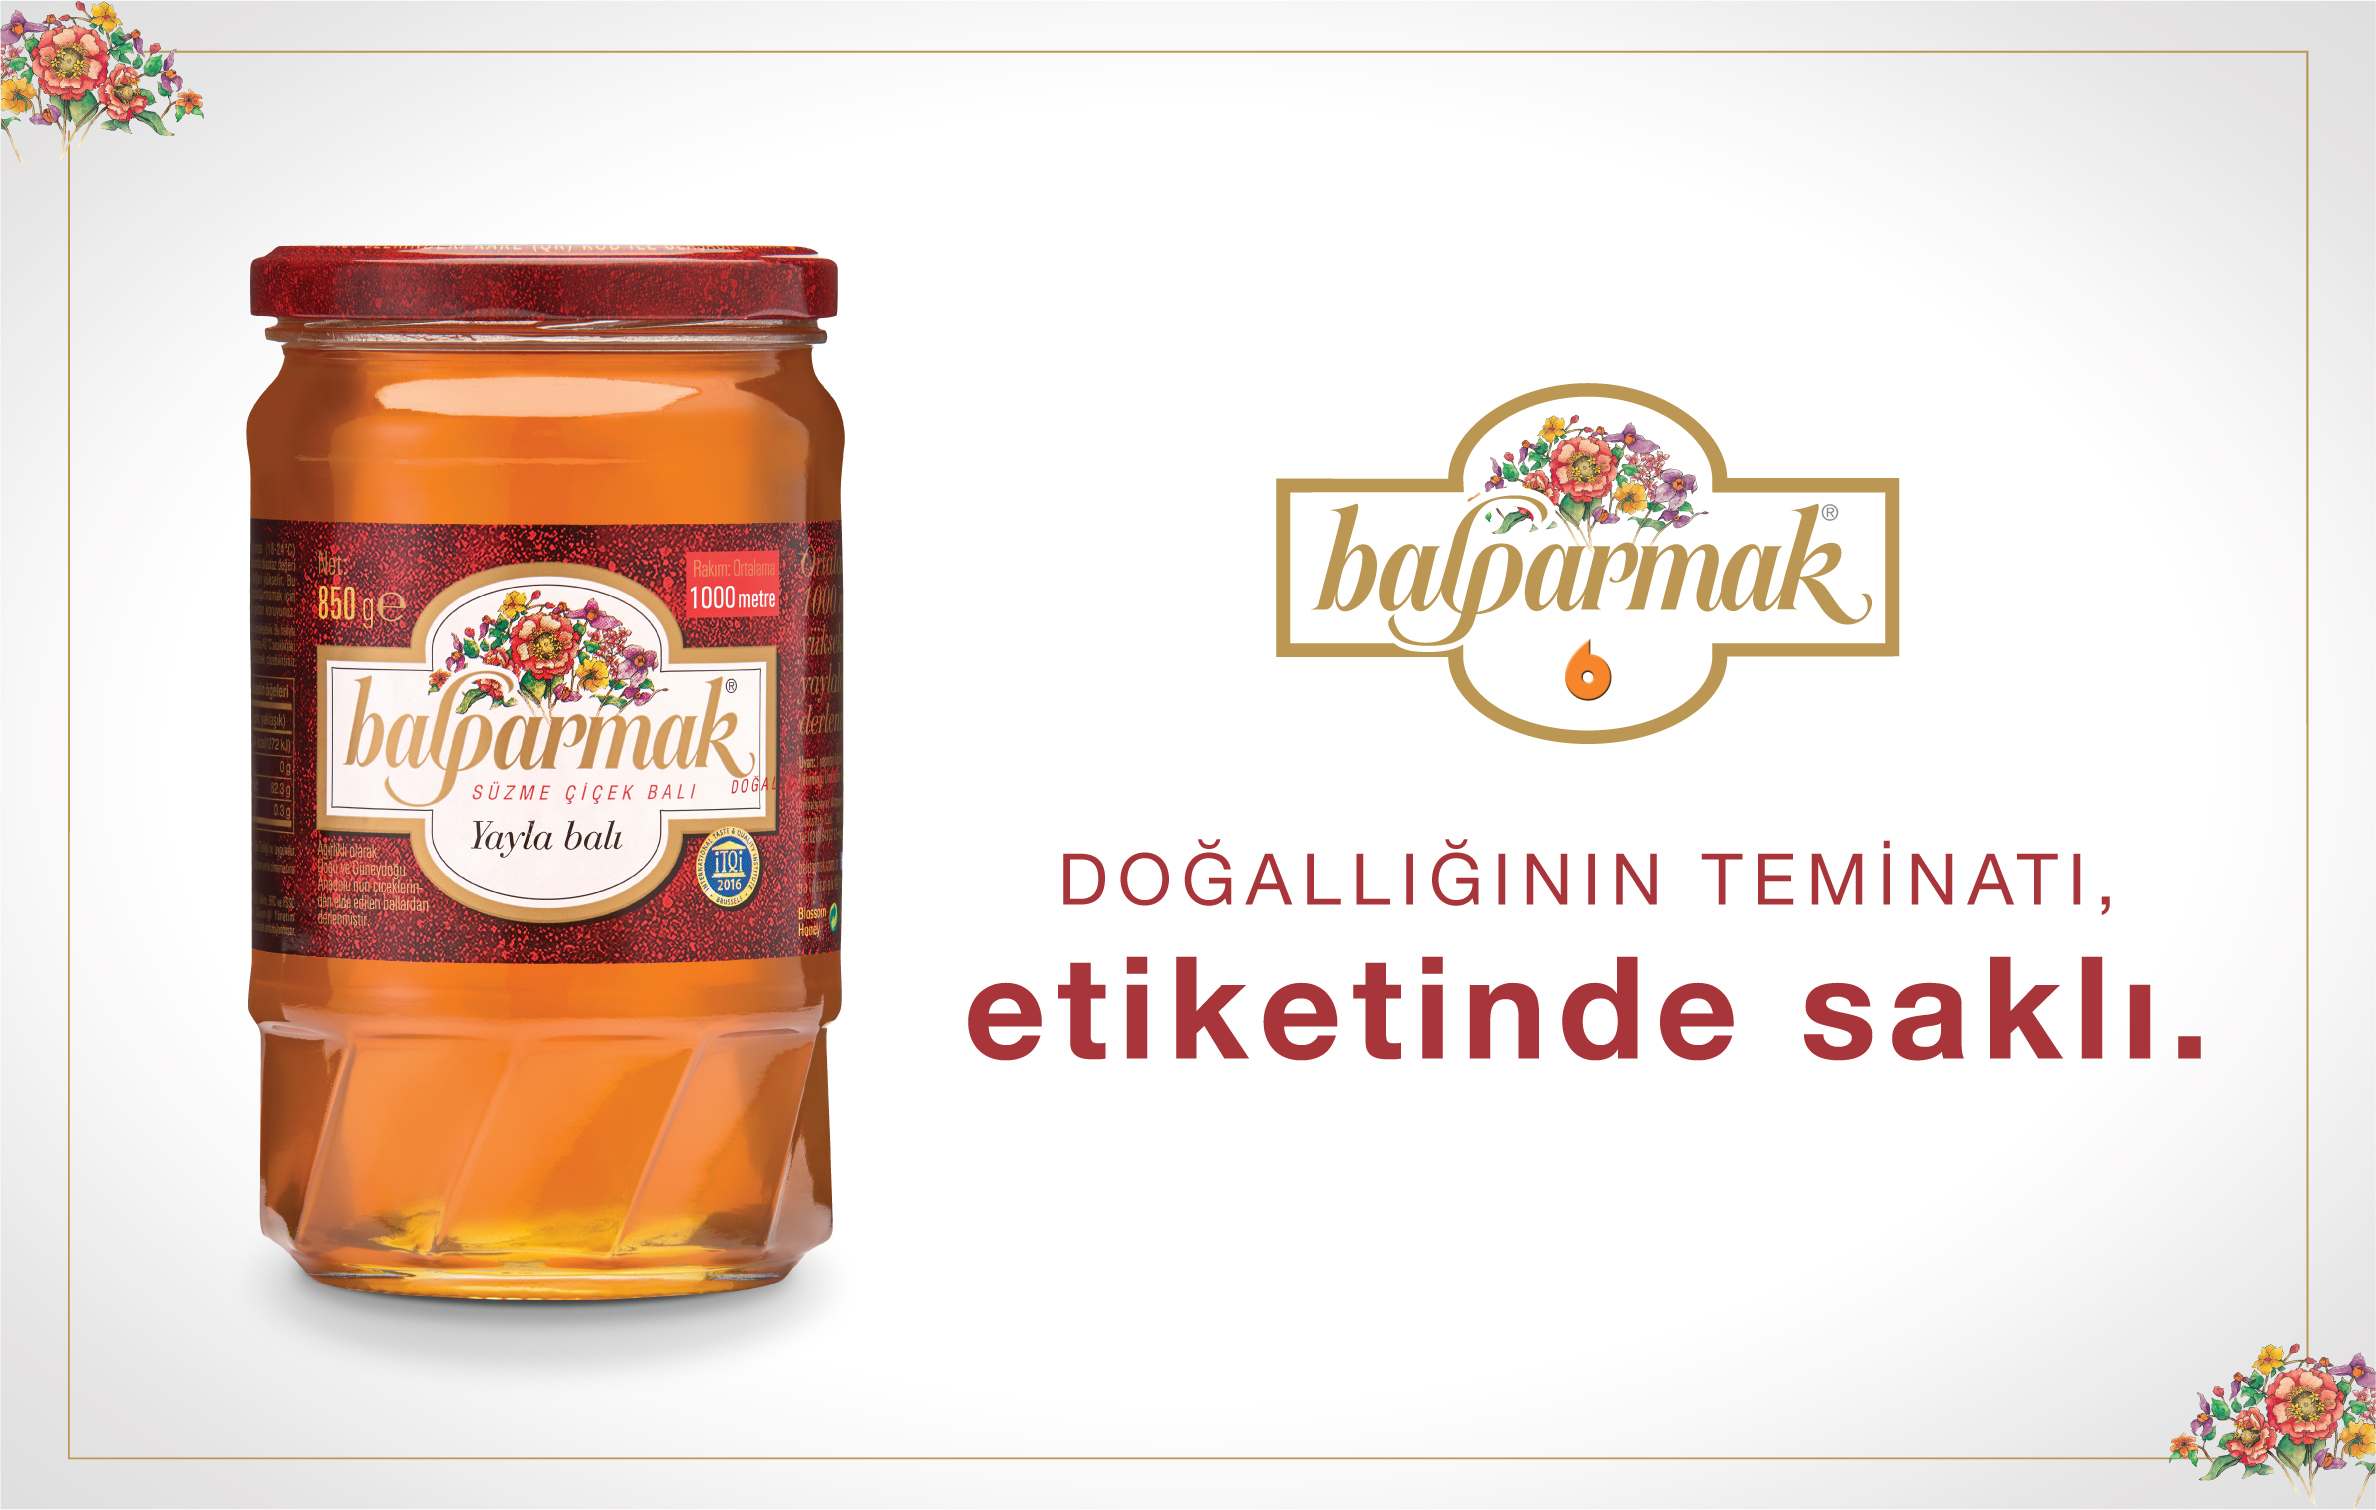 Balparmak The guarantee of naturalness is hidden in the label